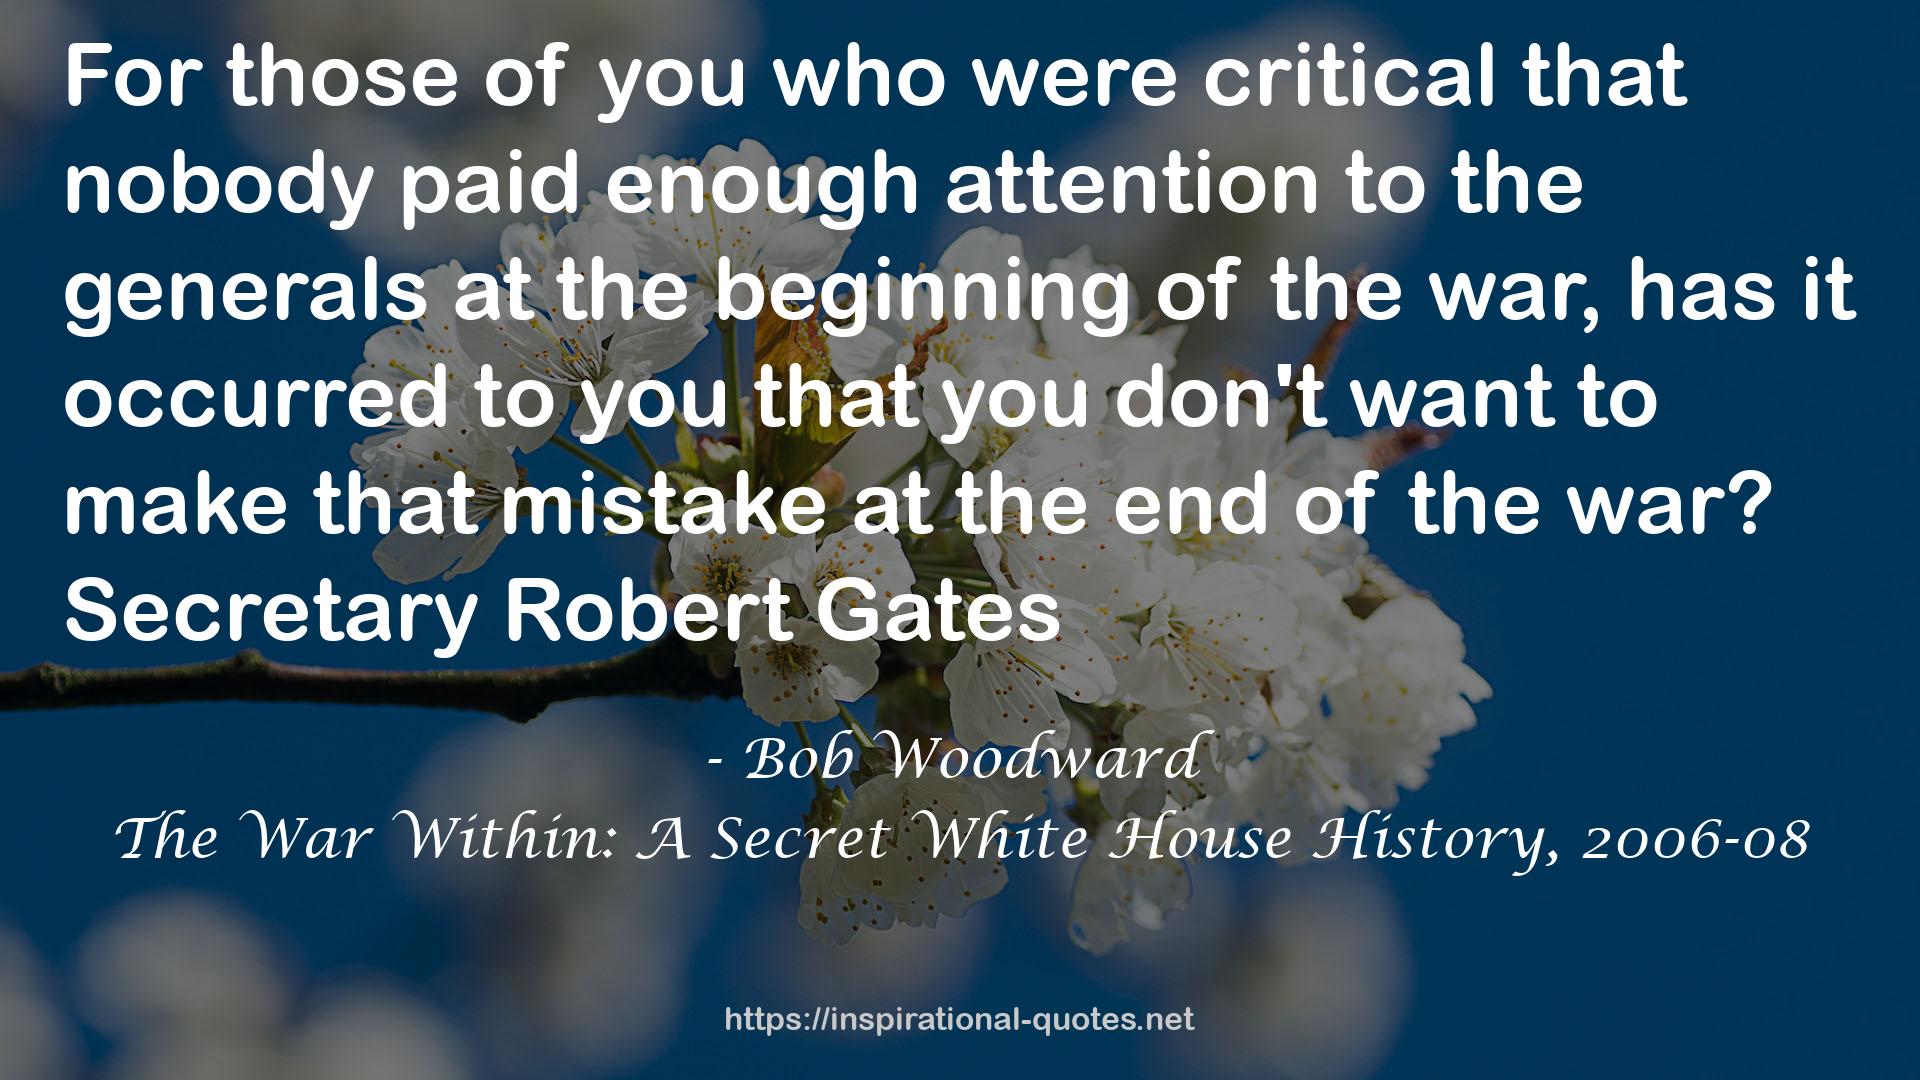 The War Within: A Secret White House History, 2006-08 QUOTES